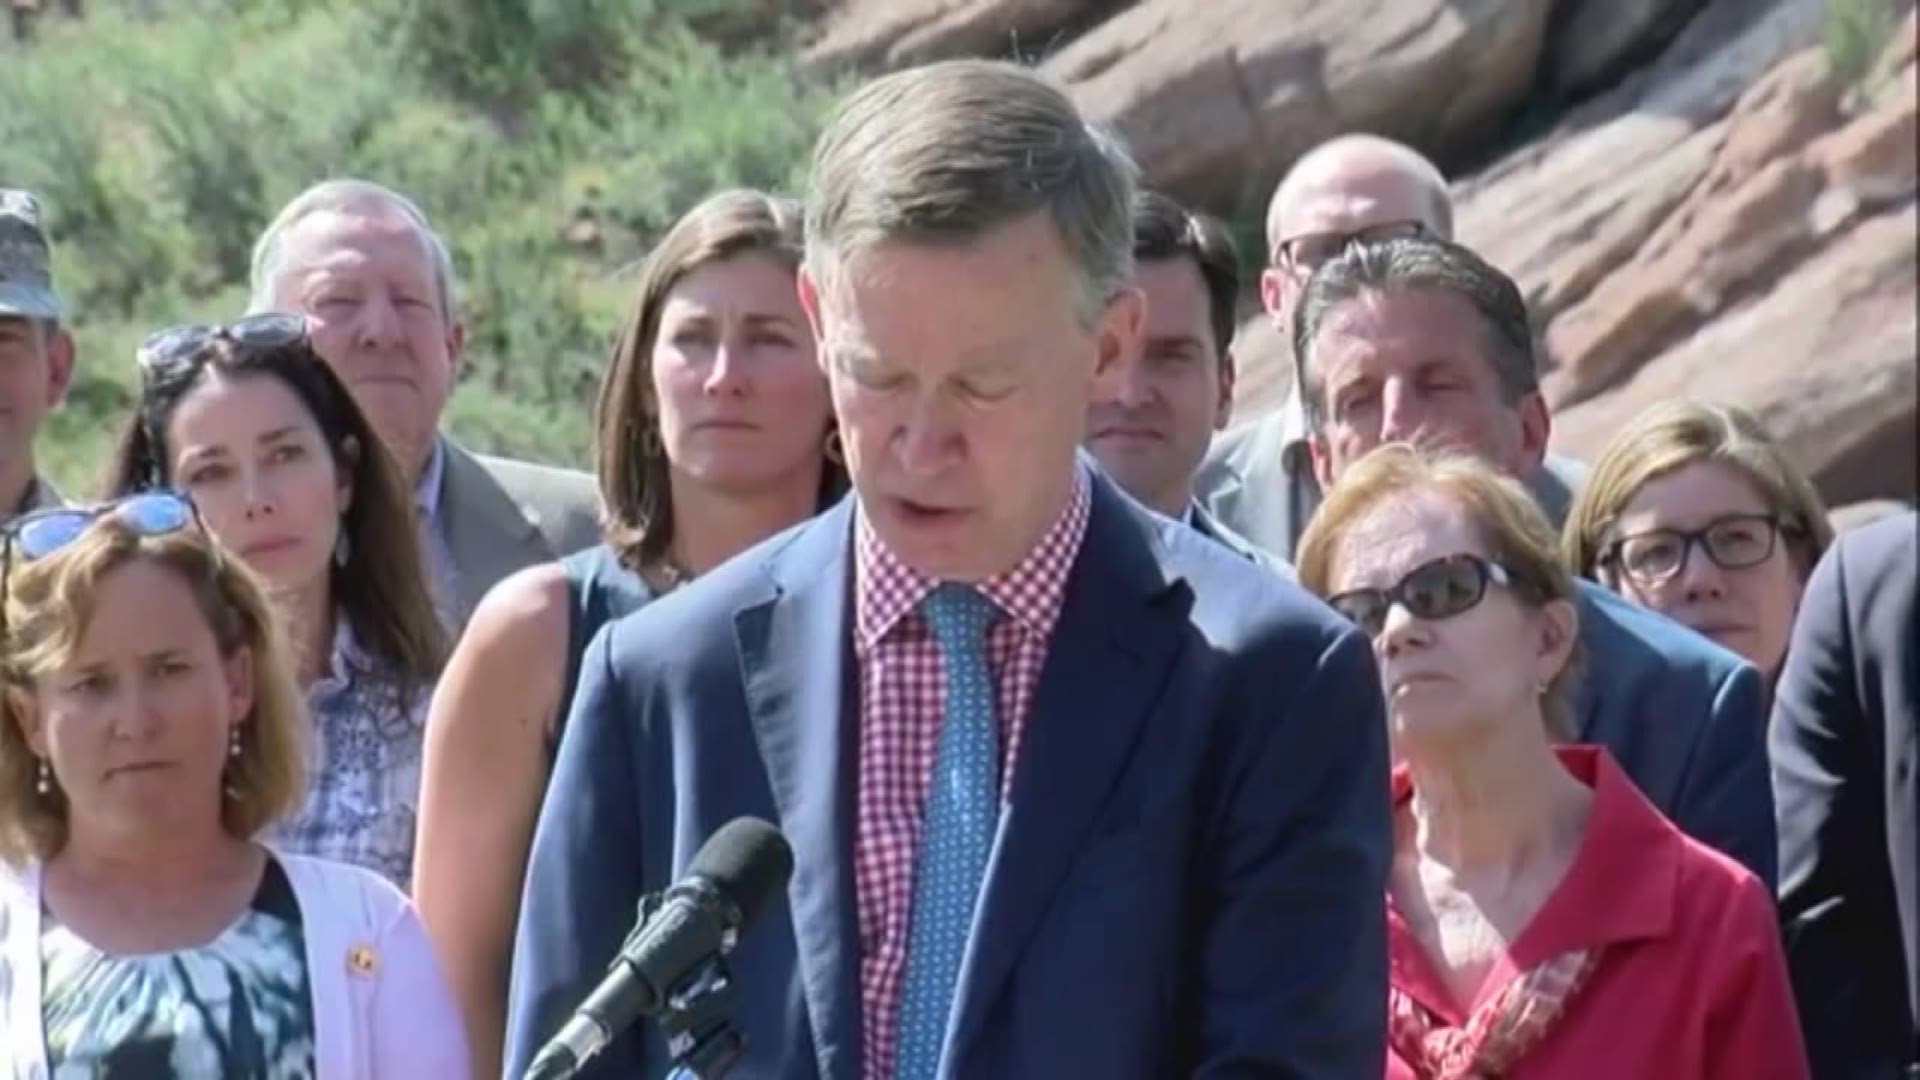 Colorado's Democratic governor has added his state to a dozen others endorsing the Paris global accord on climate change as President Donald Trump withdraws the nation from the agreement.